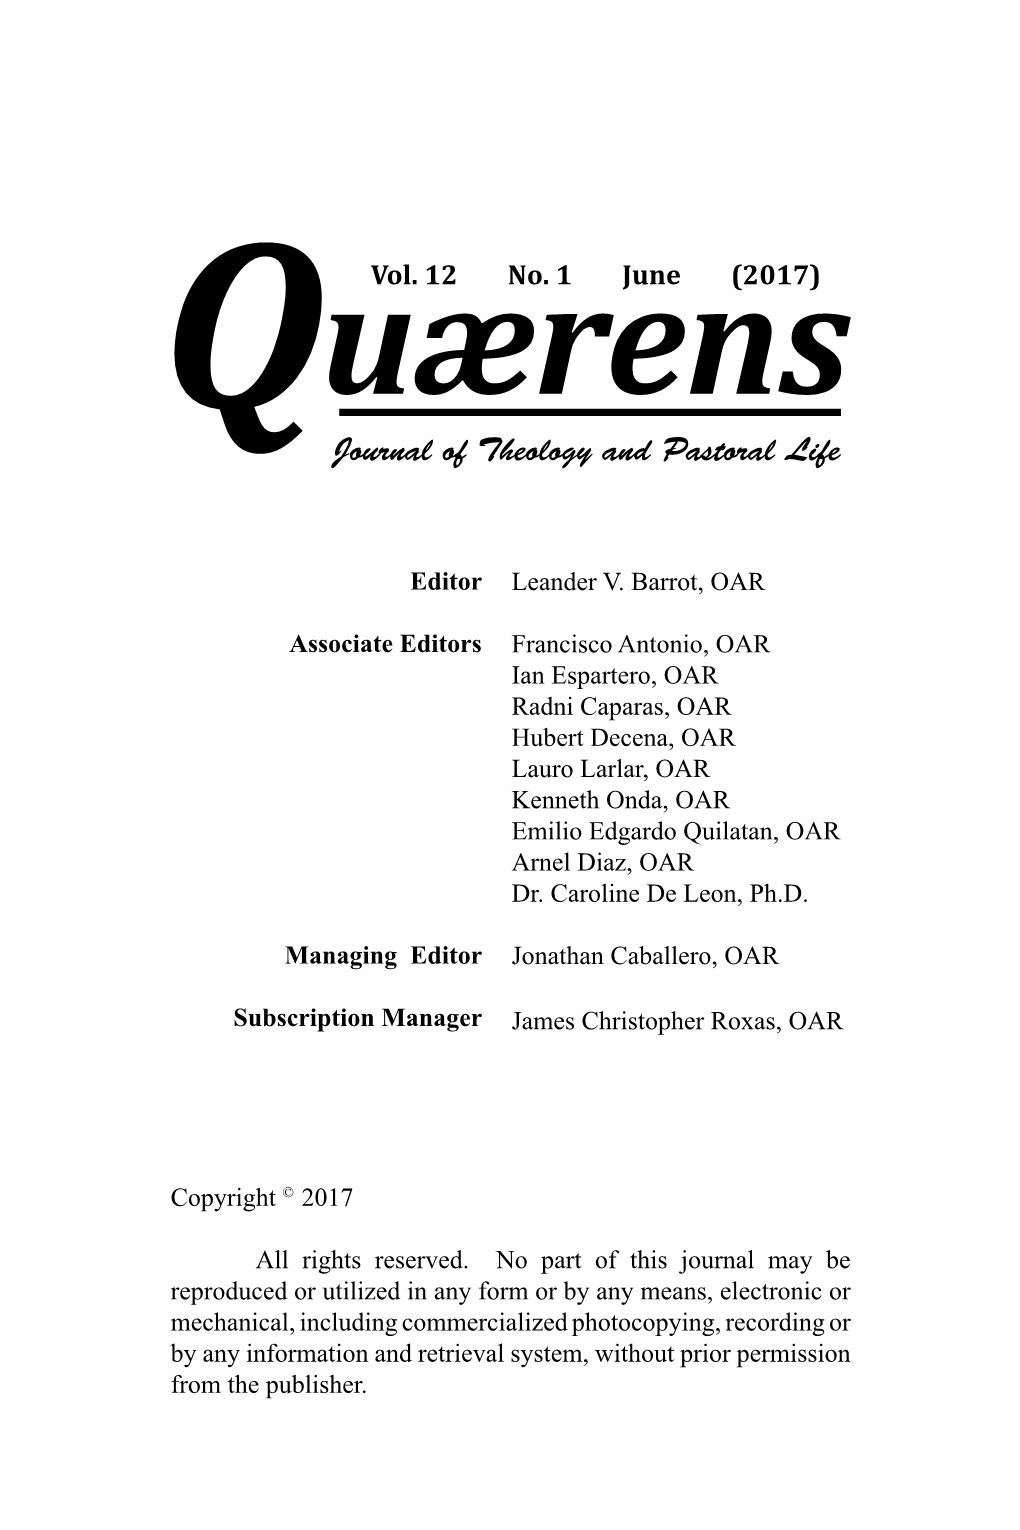 Journal of Theology and Pastoral Life